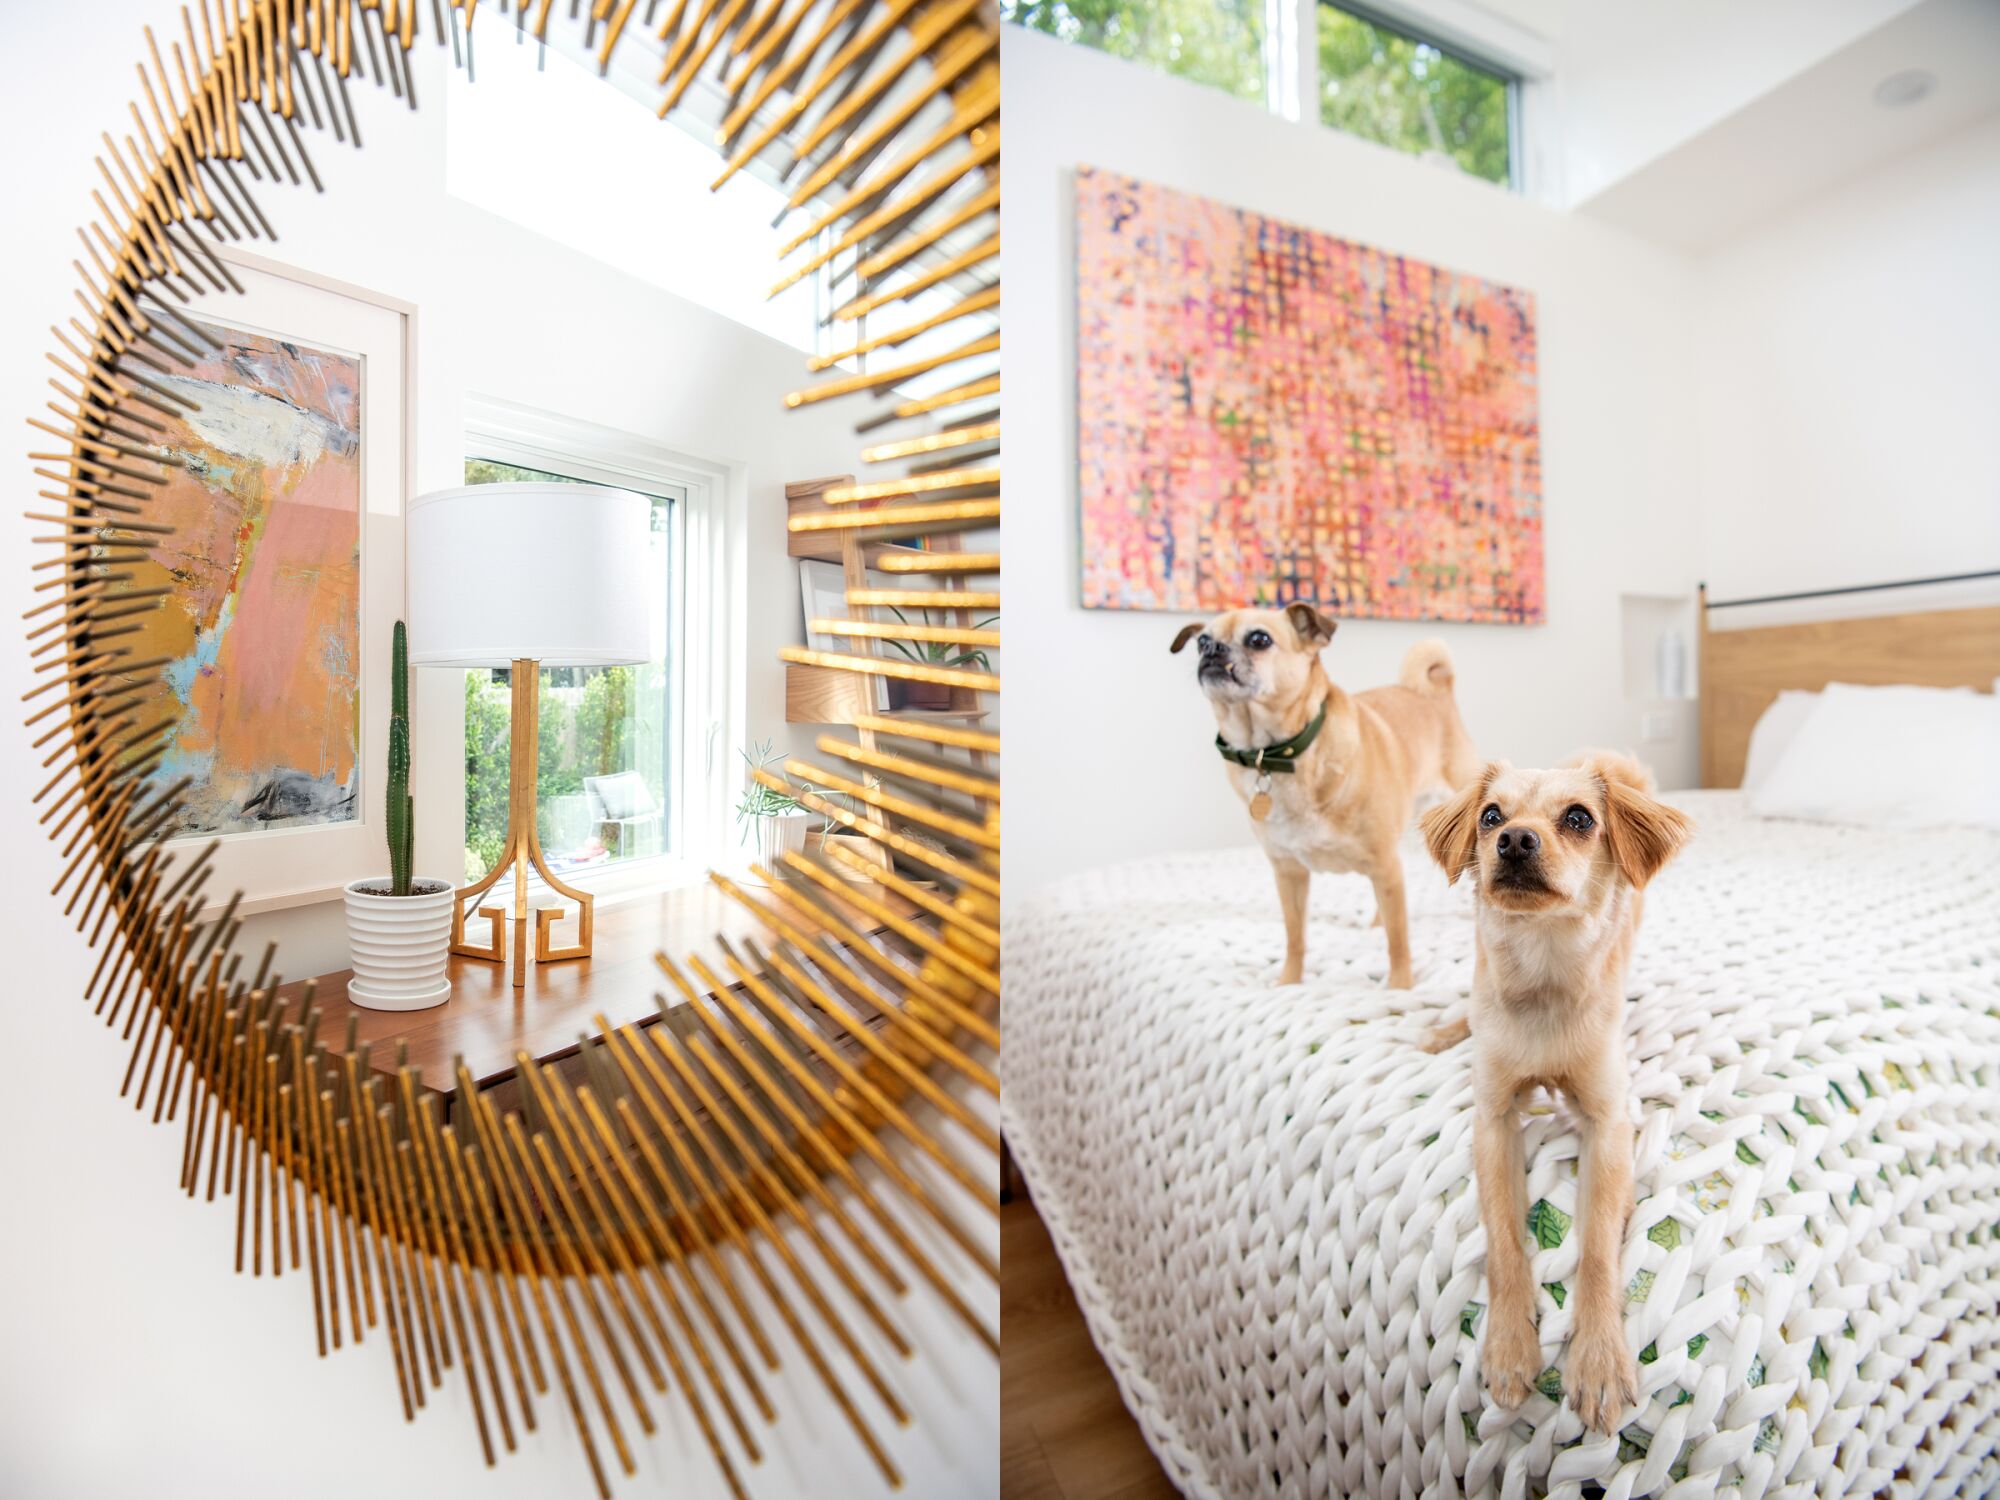 Two photos side by side, one of a mirror reflecting details inside a bedroom, the other of a pair of dogs sitting on a bed.